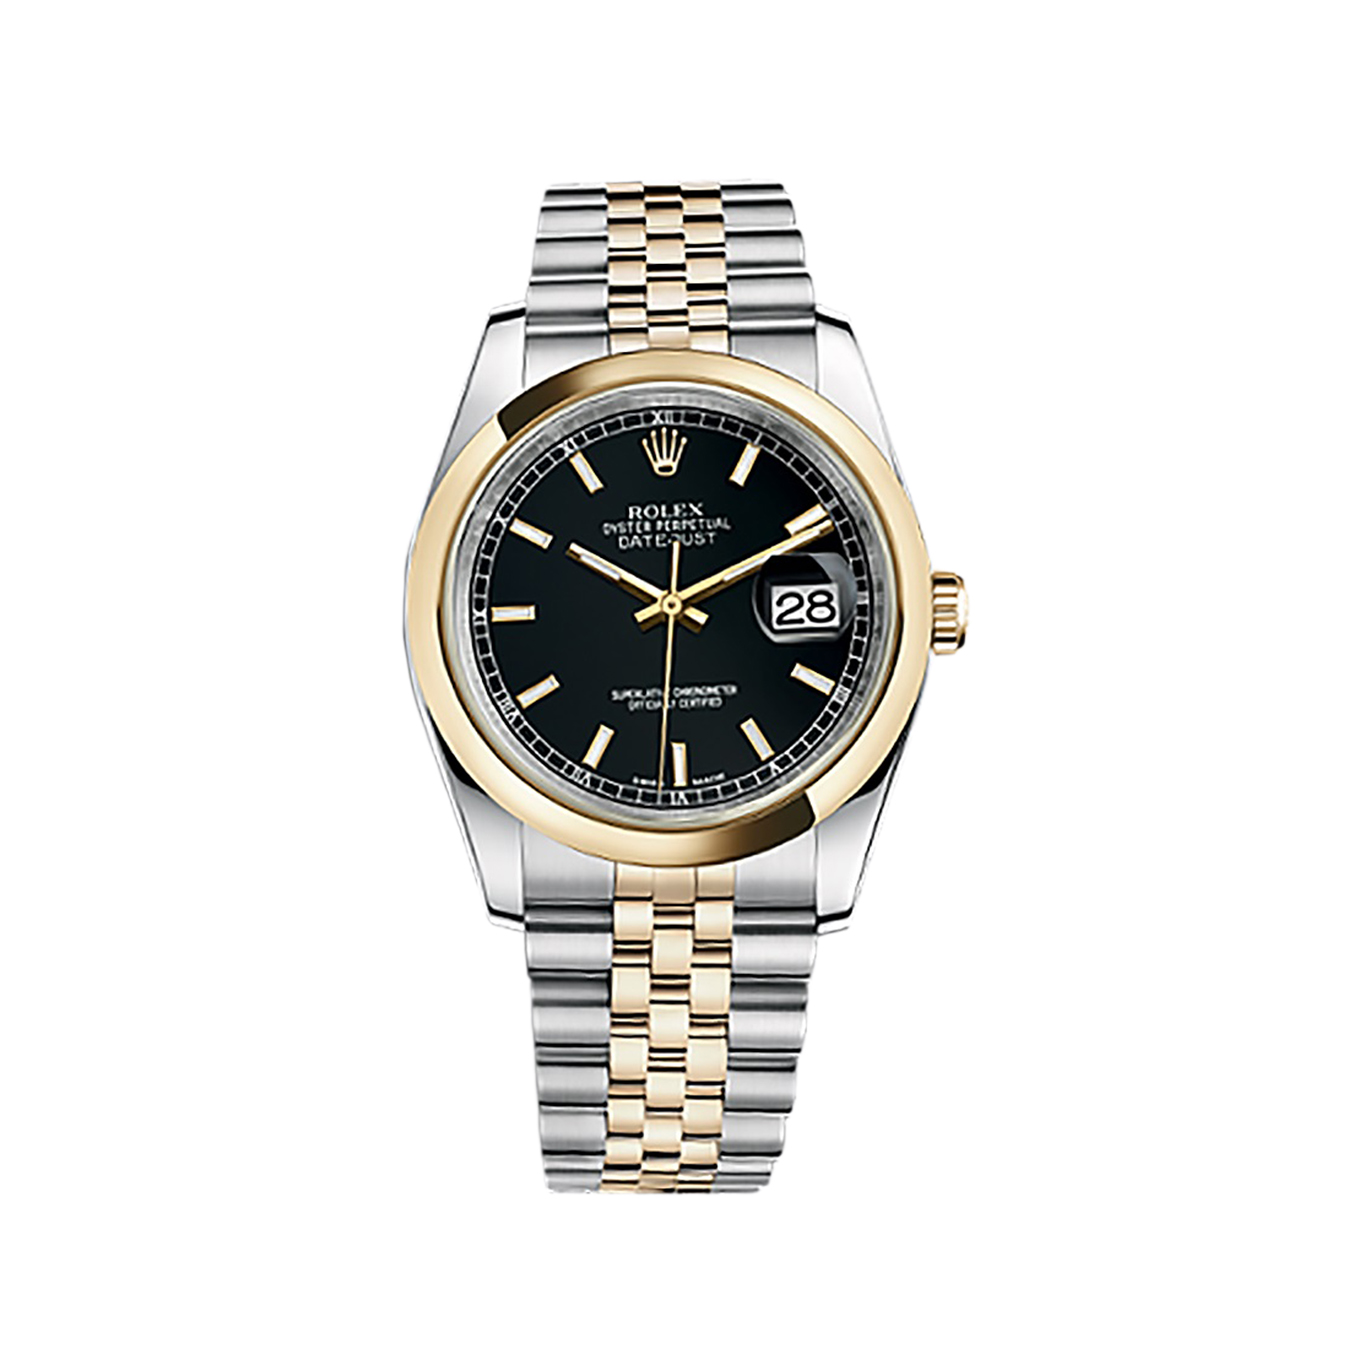 Datejust 36 116203 Gold & Stainless Steel Watch (Black)